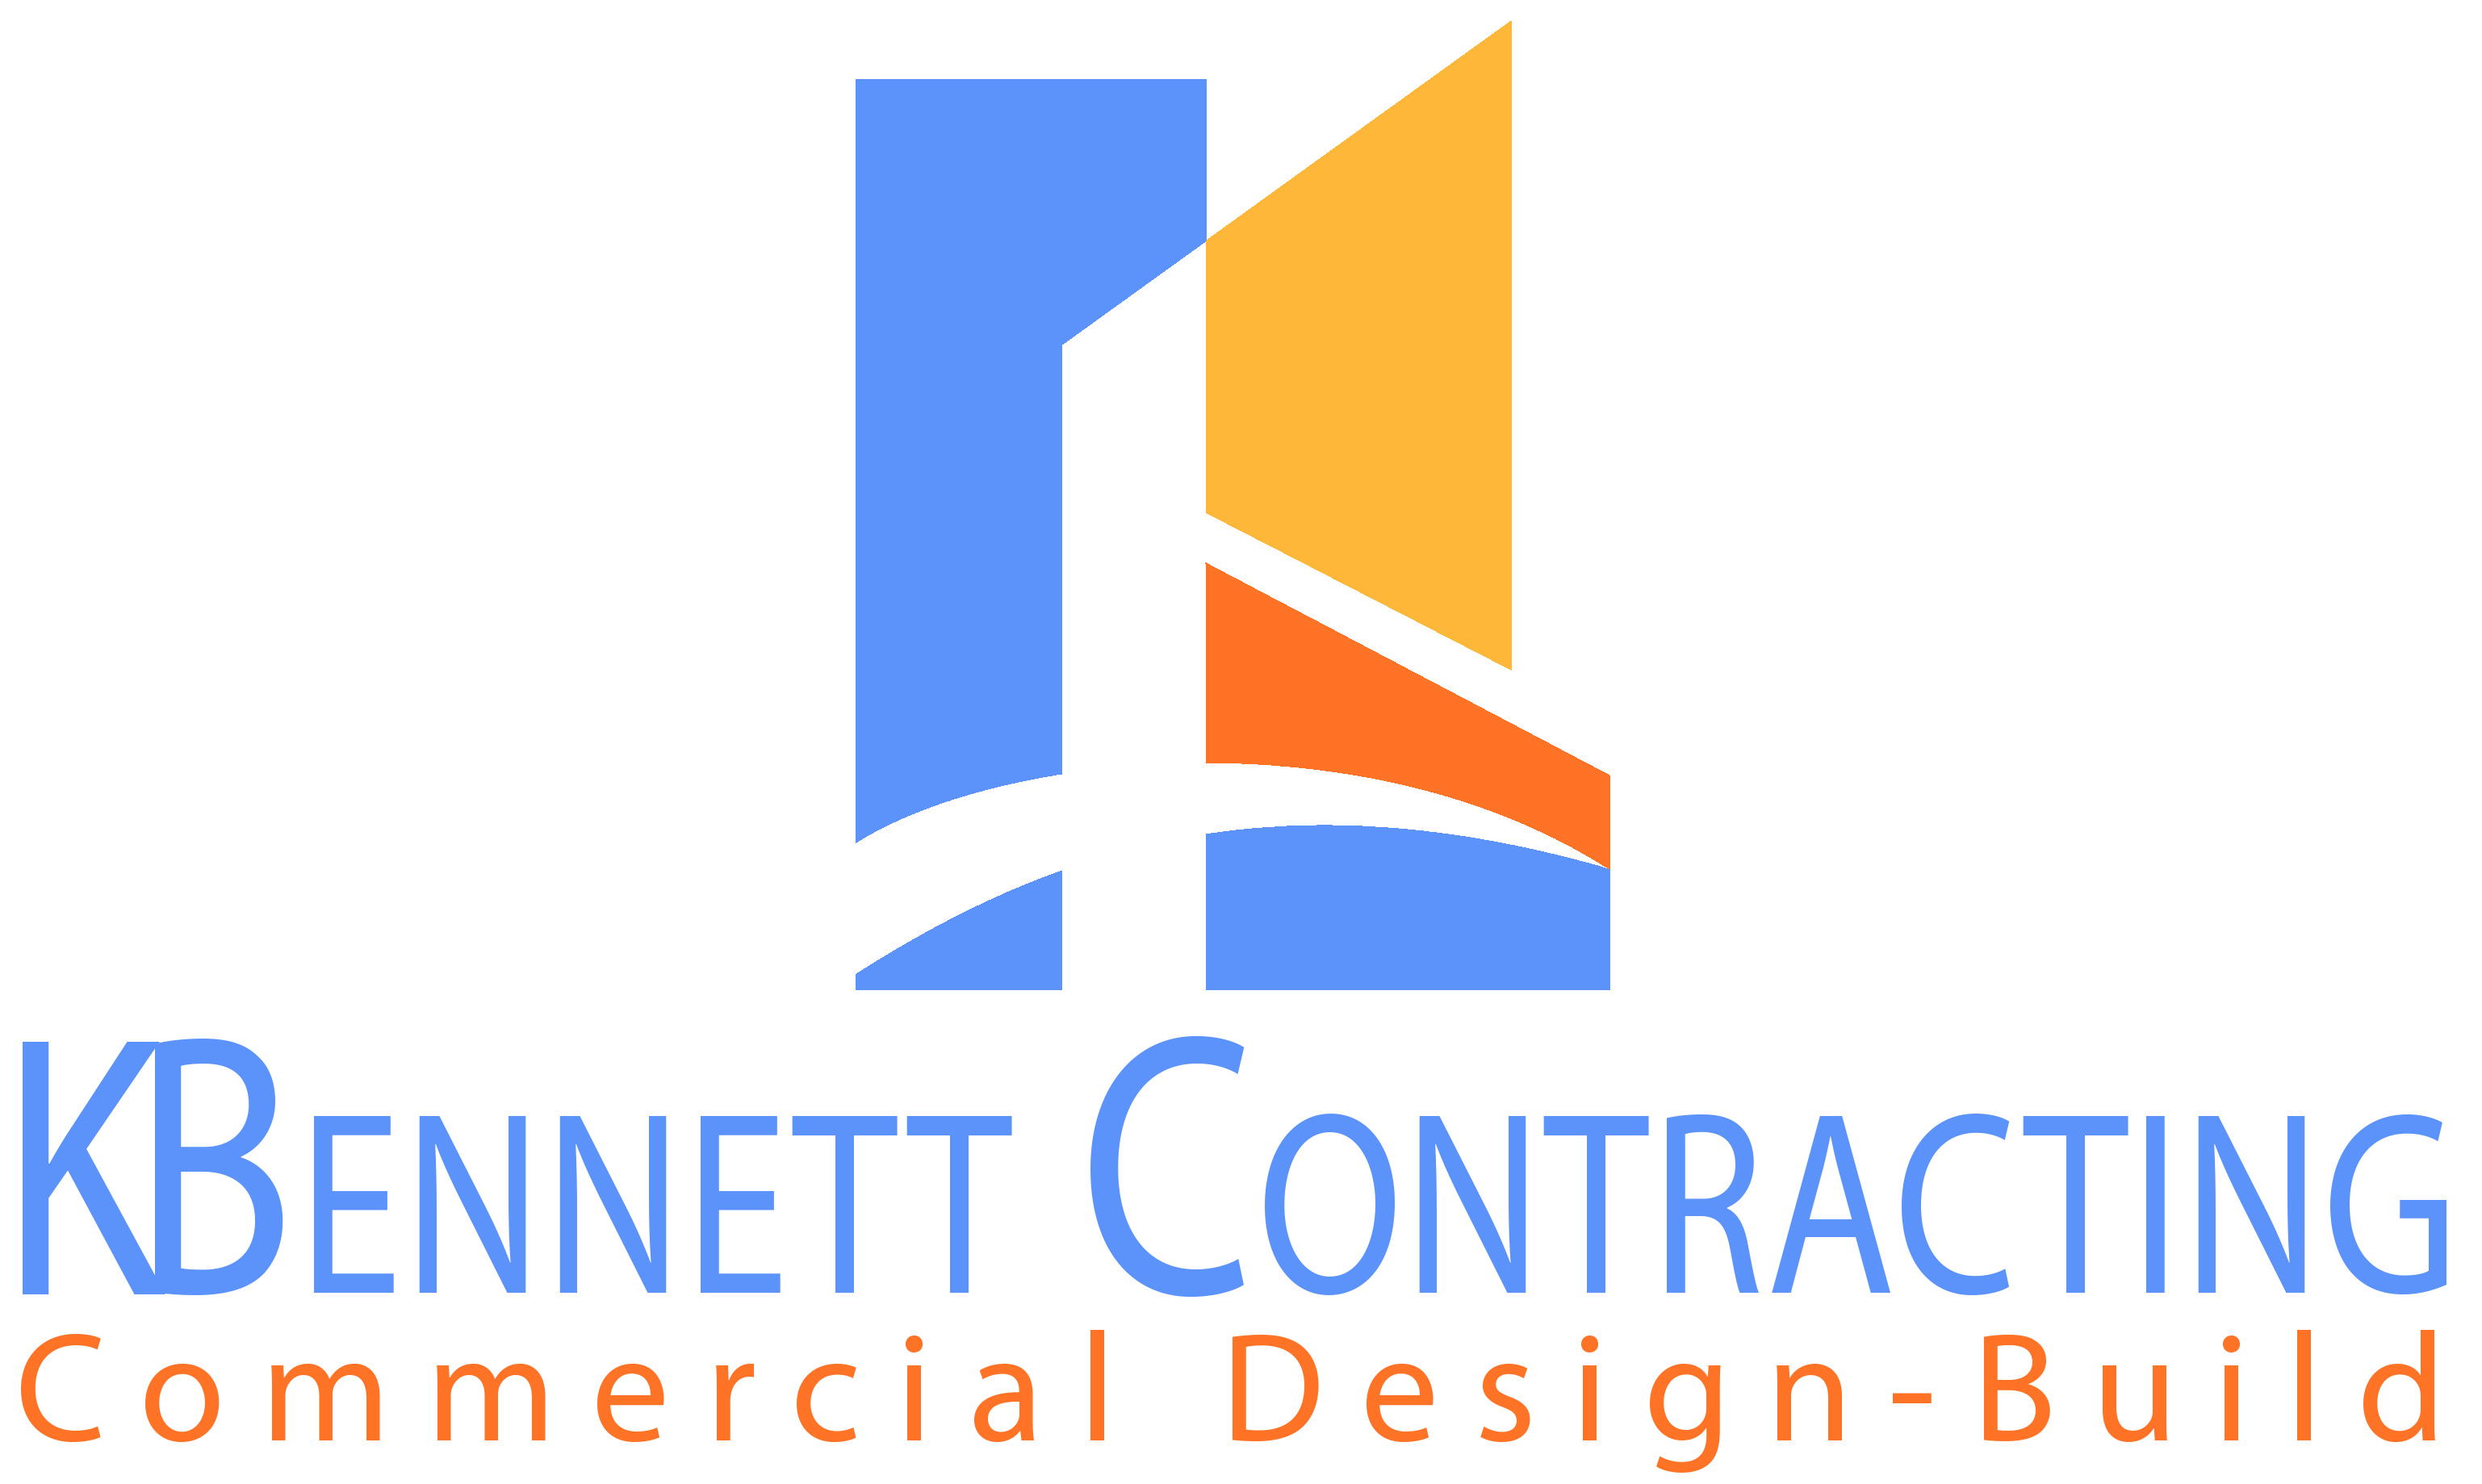 About - KBennett Contracting